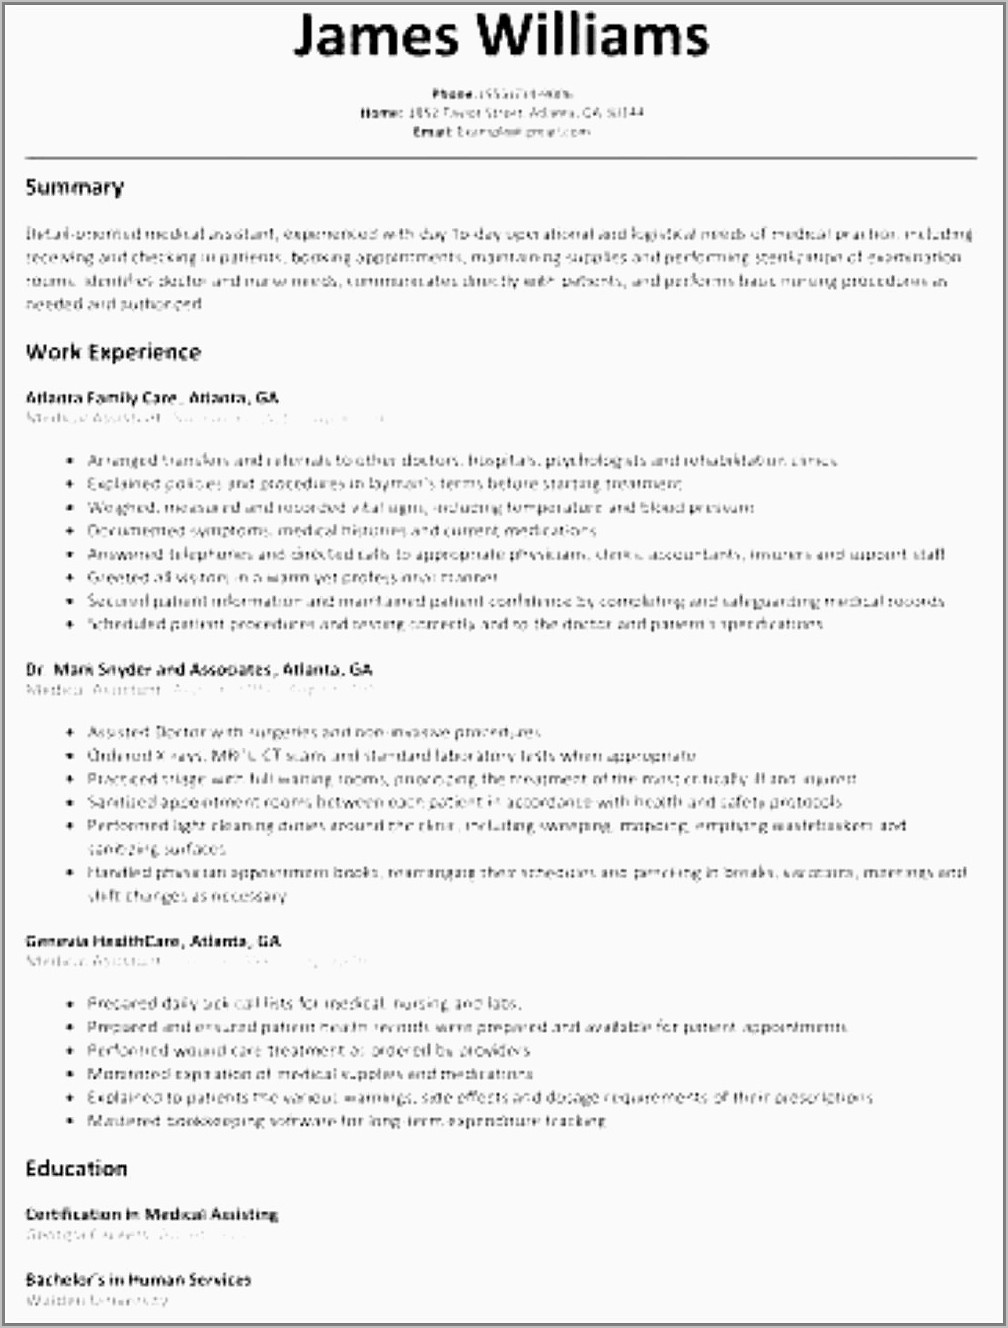 Resume For Sales Executive In Fmcg